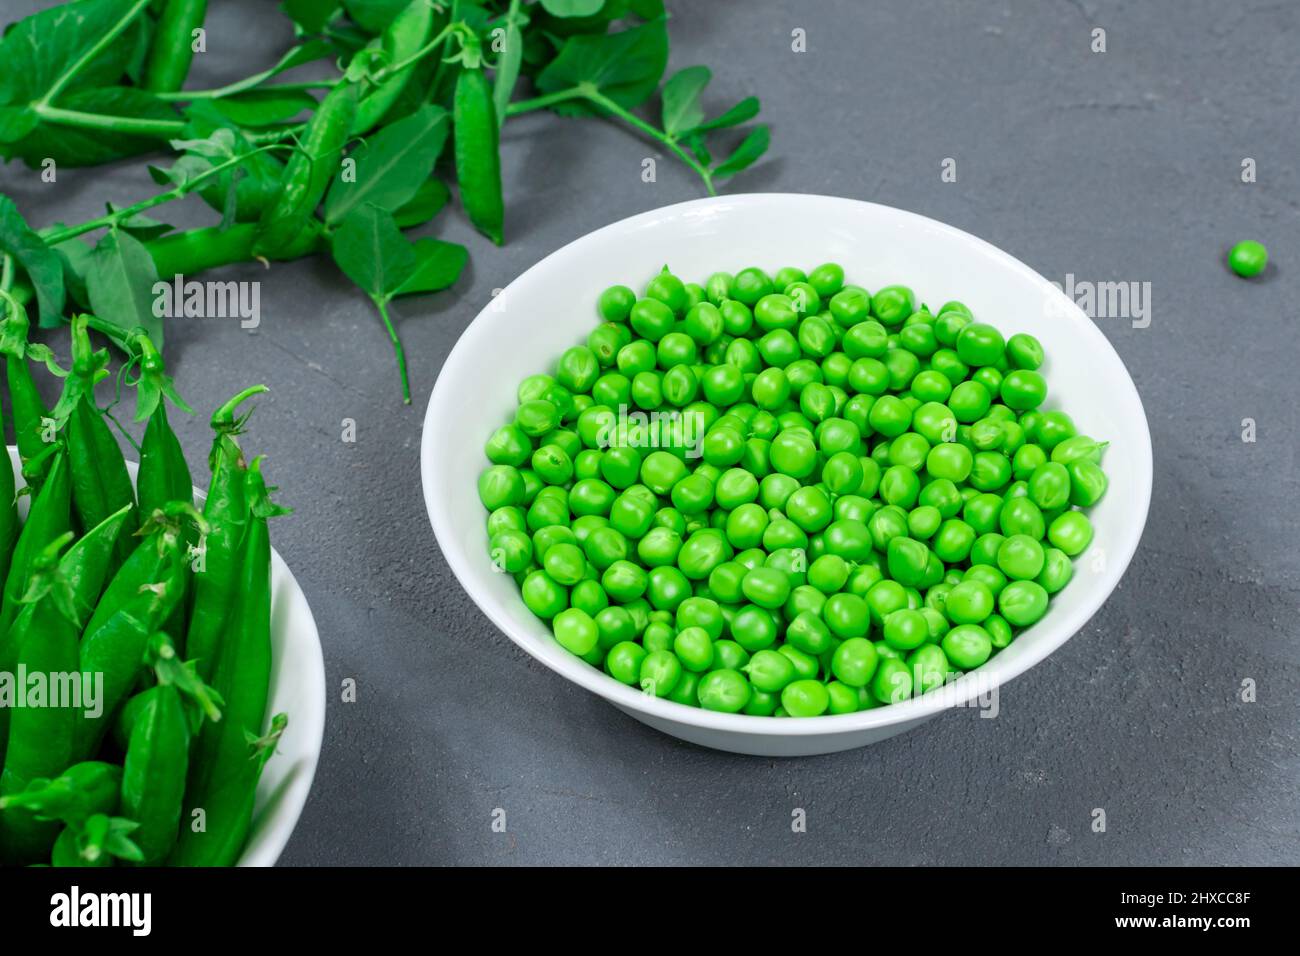 Healthy food. Fresh green peas in a white bowl with leaves and sweet pea pods on a gray background Stock Photo